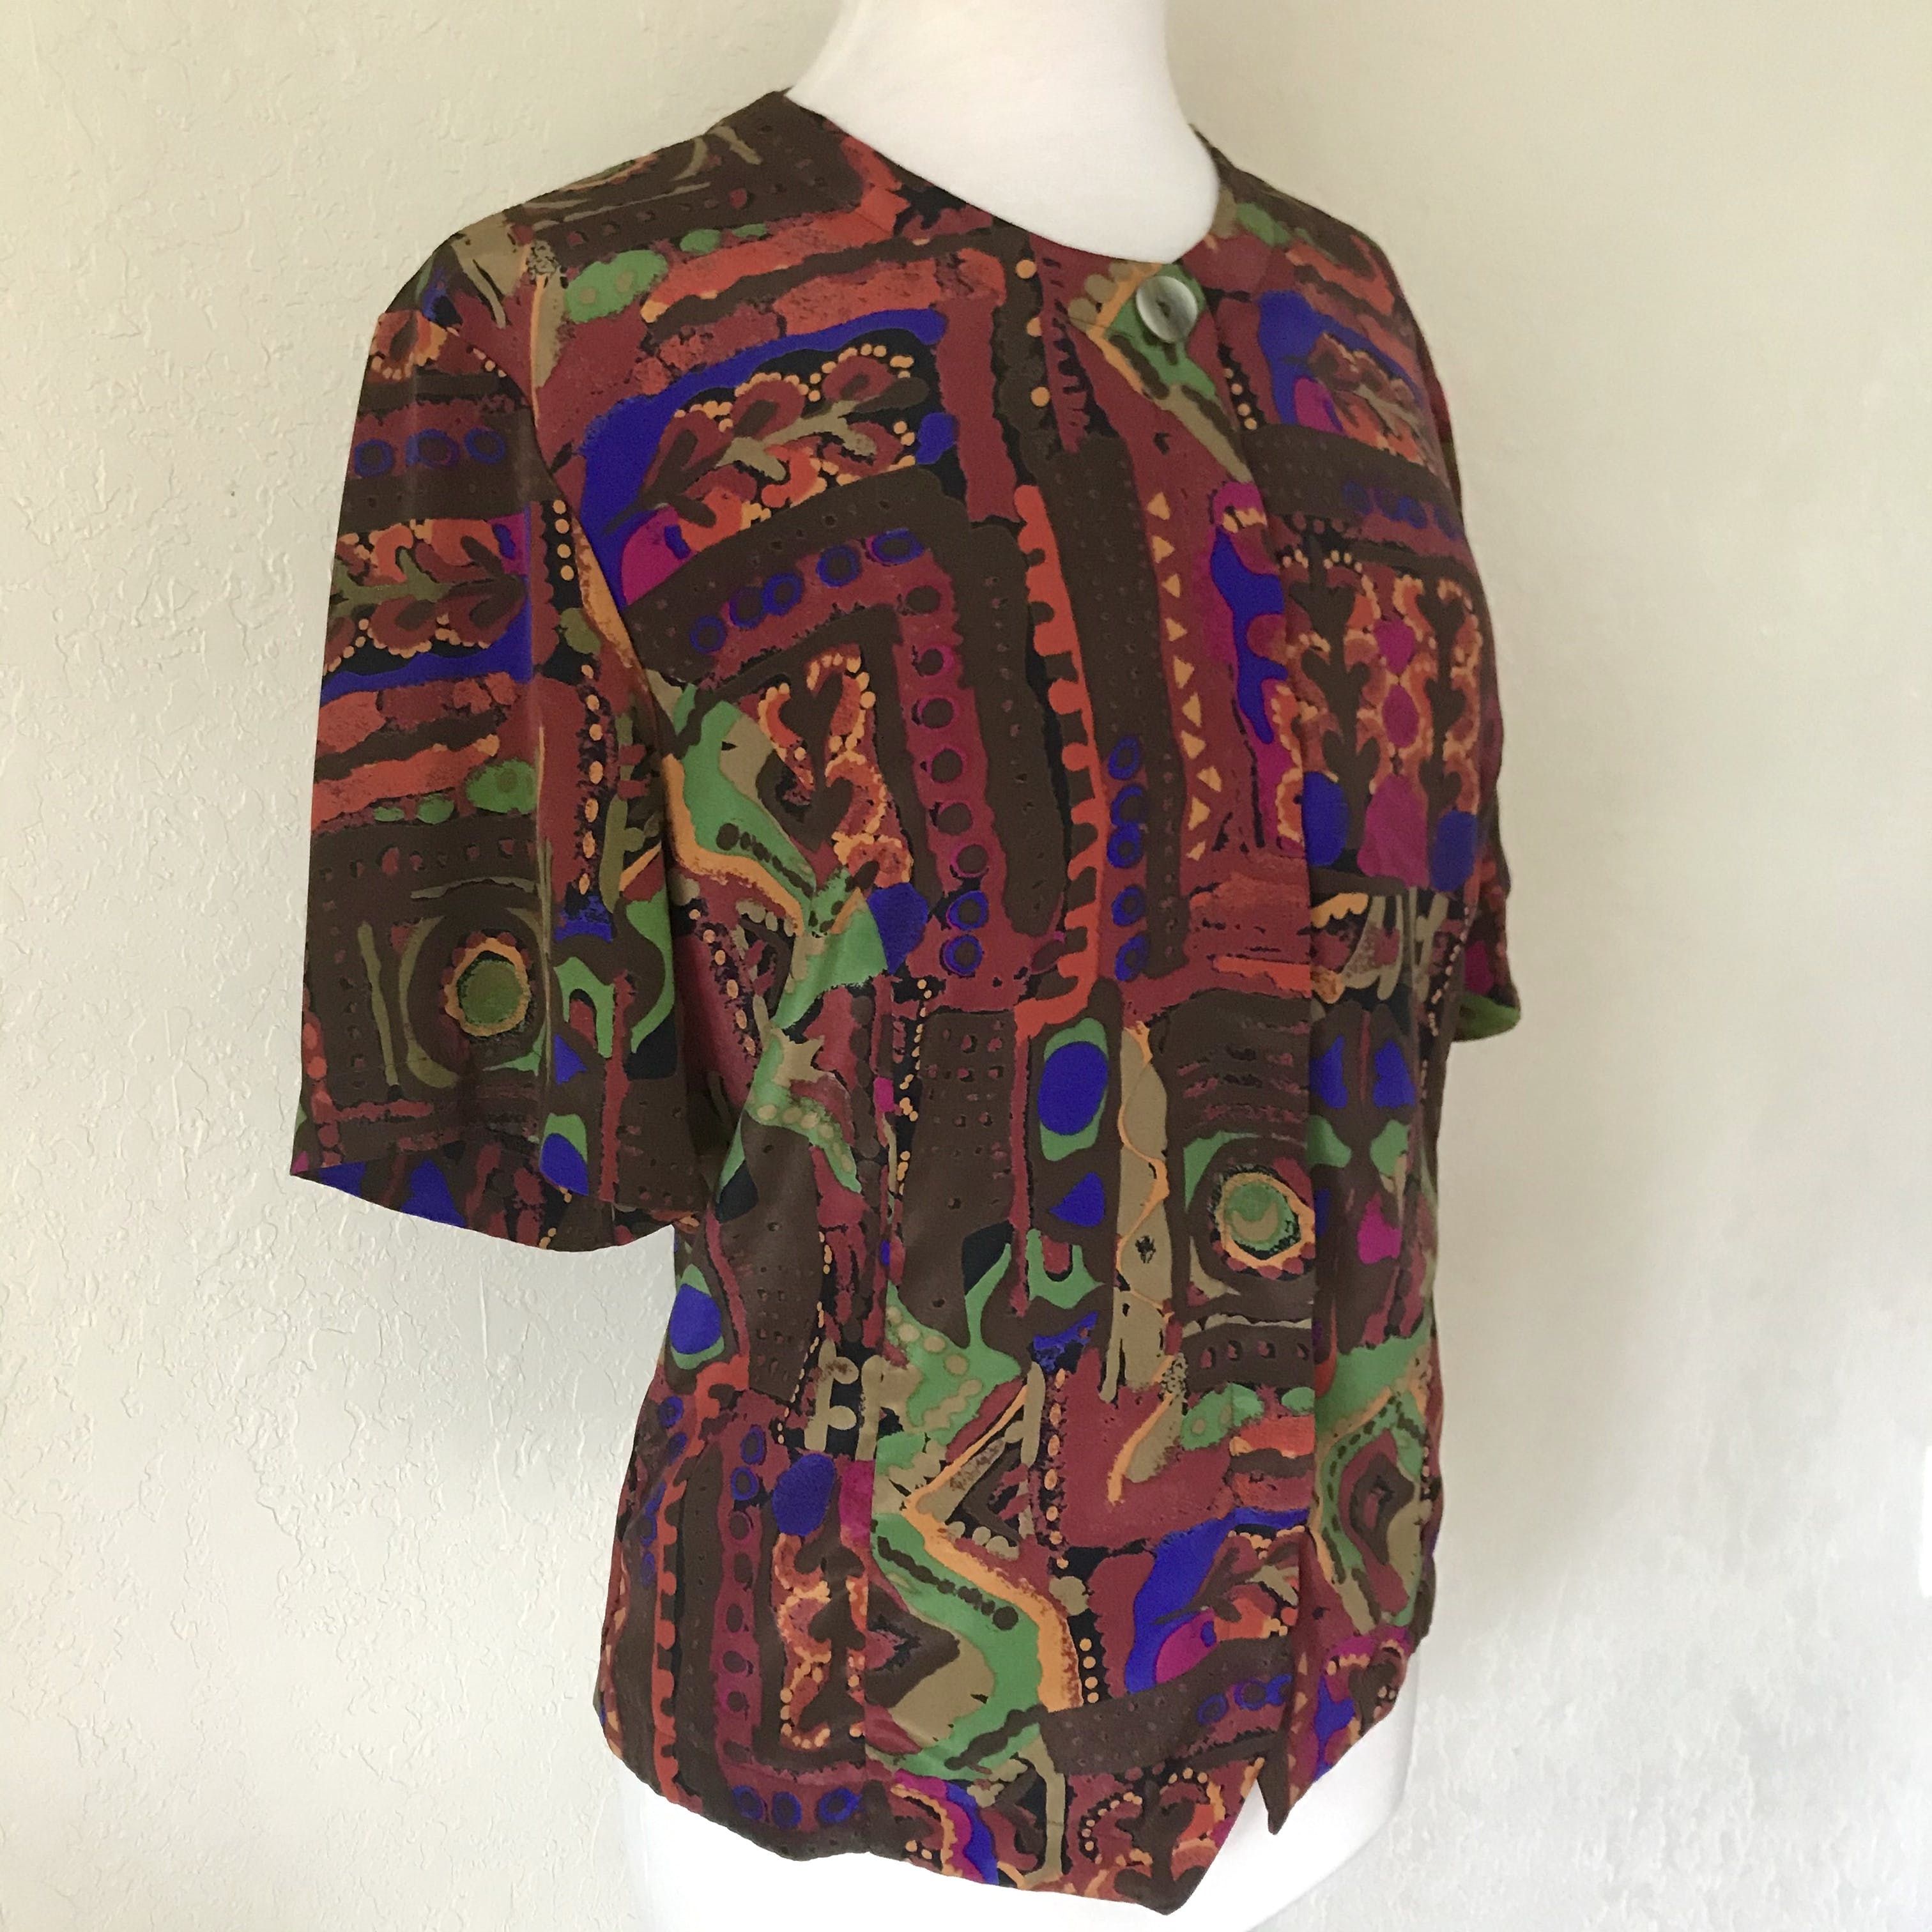 Vintage 90’s Abstract Patterned Blouse by Bora Bora | Shop THRILLING